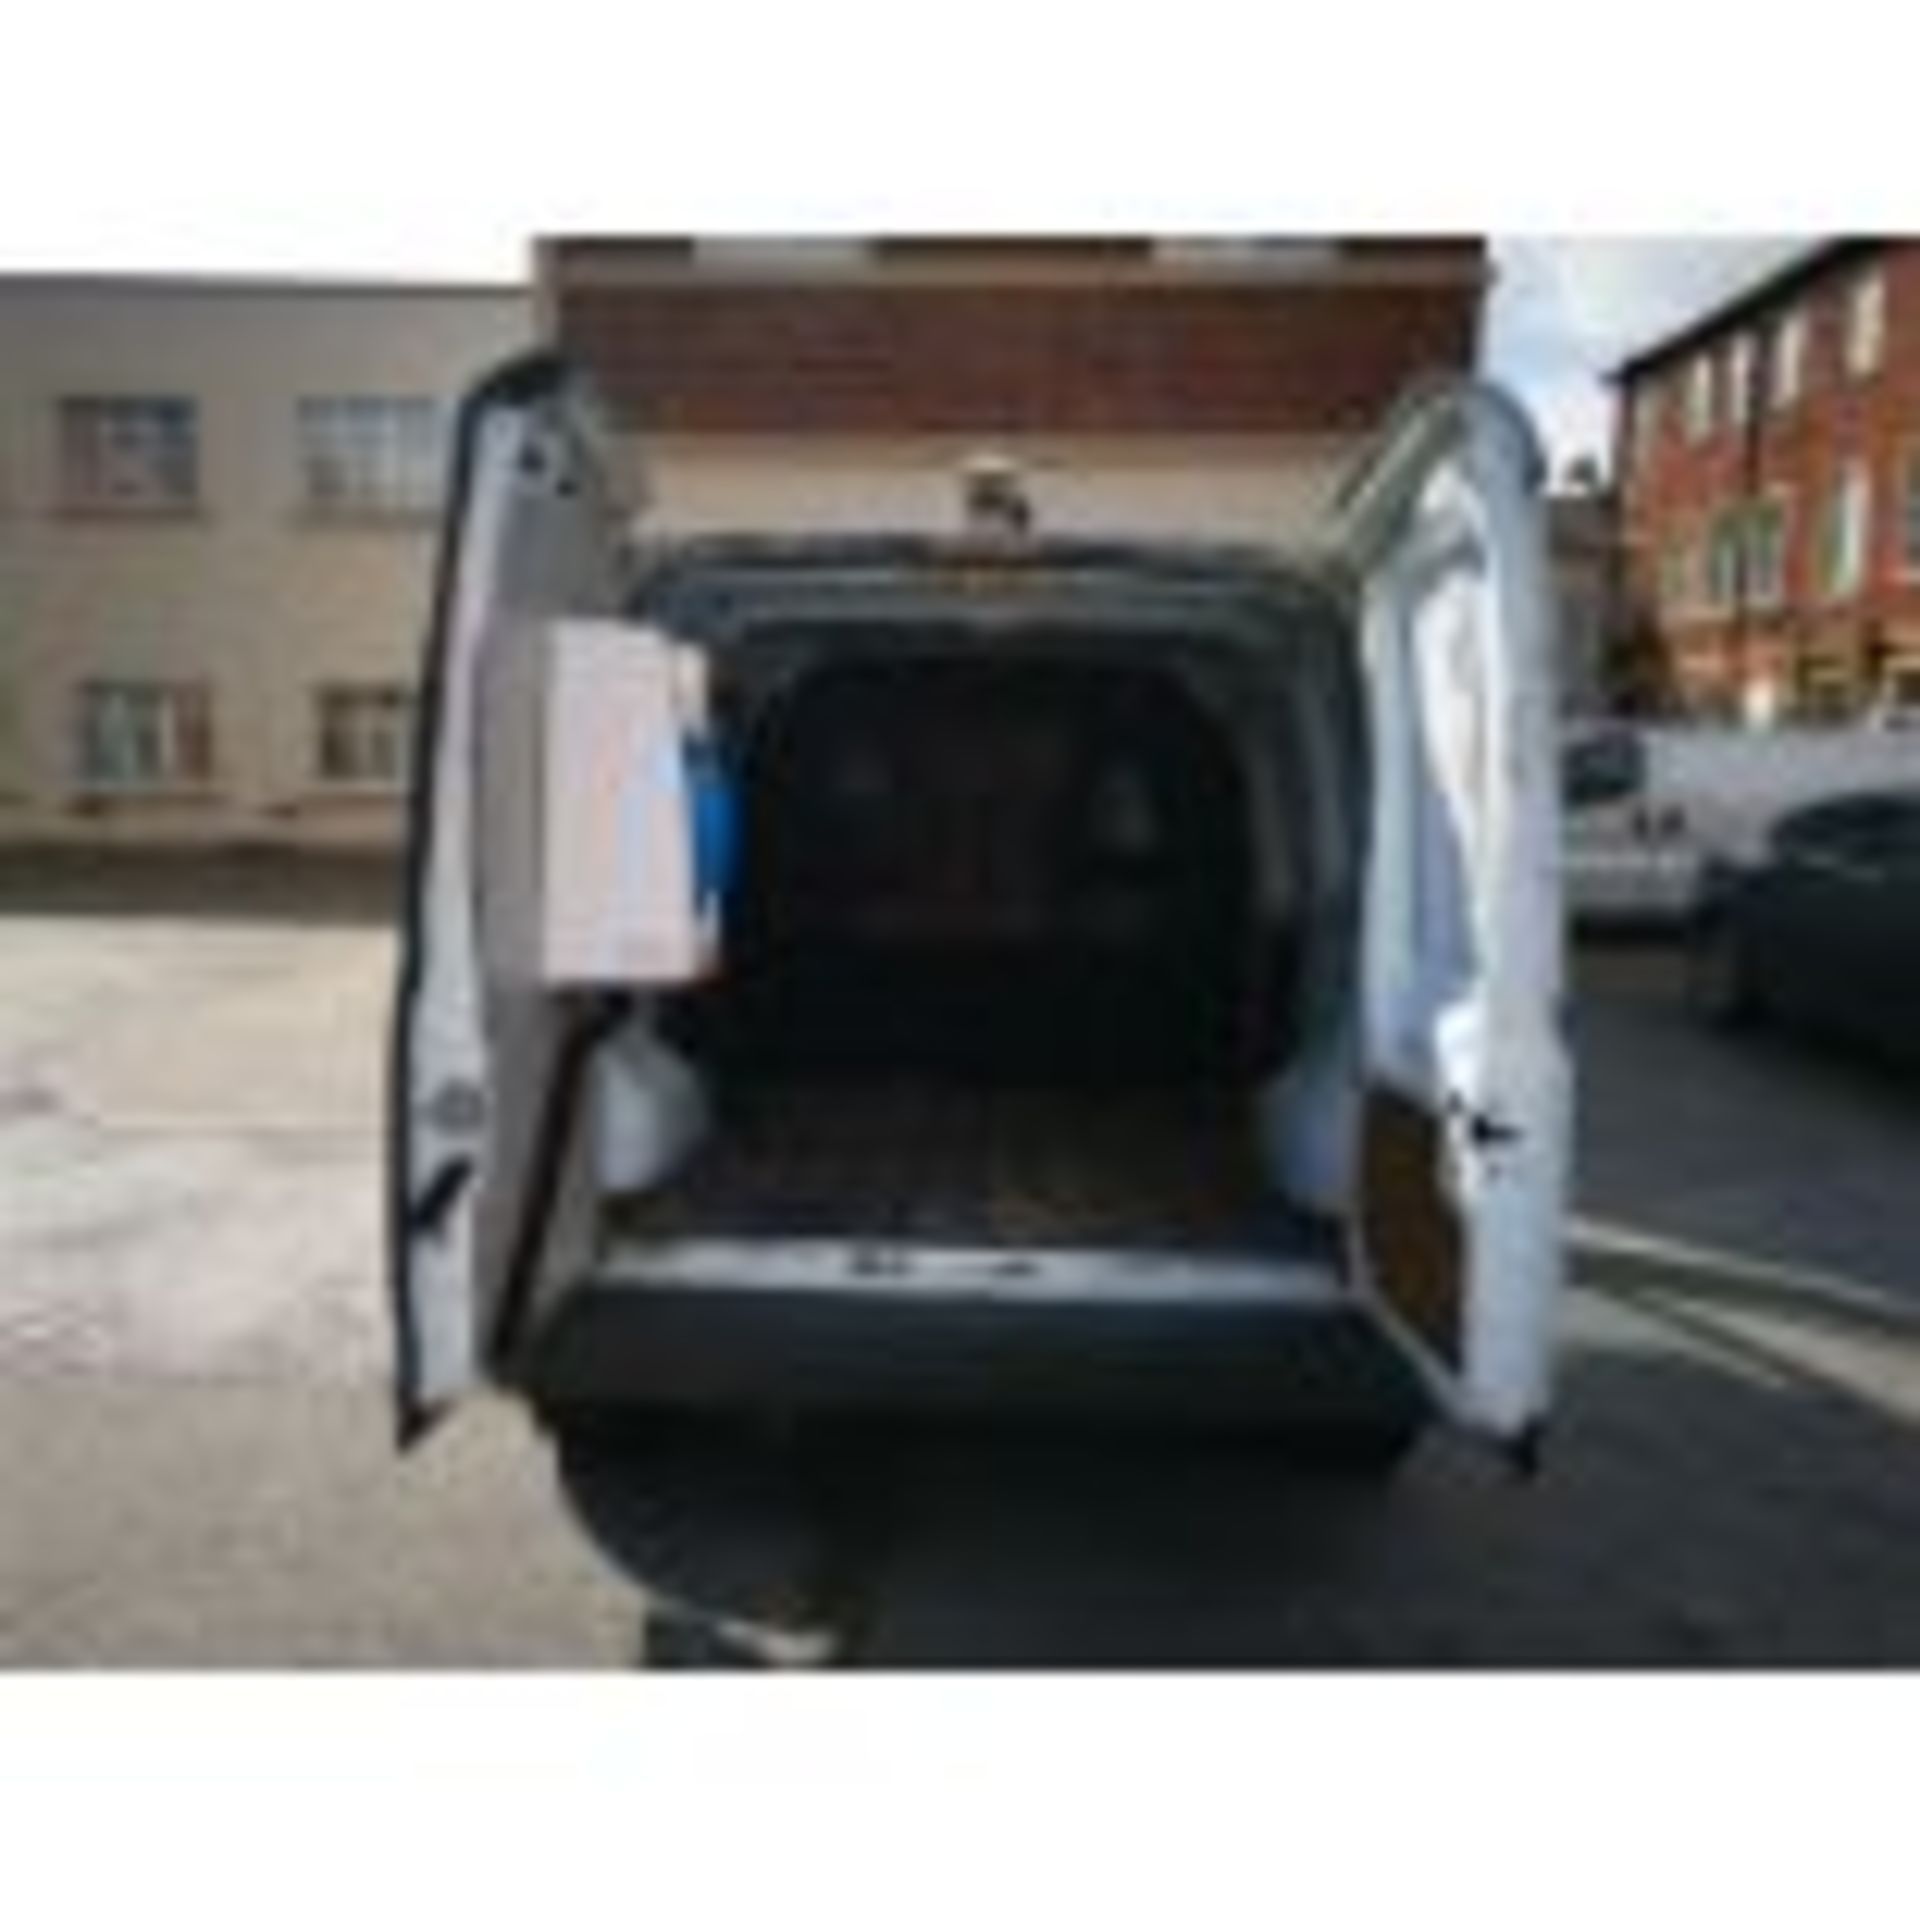 ENTRY DIRECT FROM LOCAL AUTHORITY Ford Transit Con - Image 21 of 23